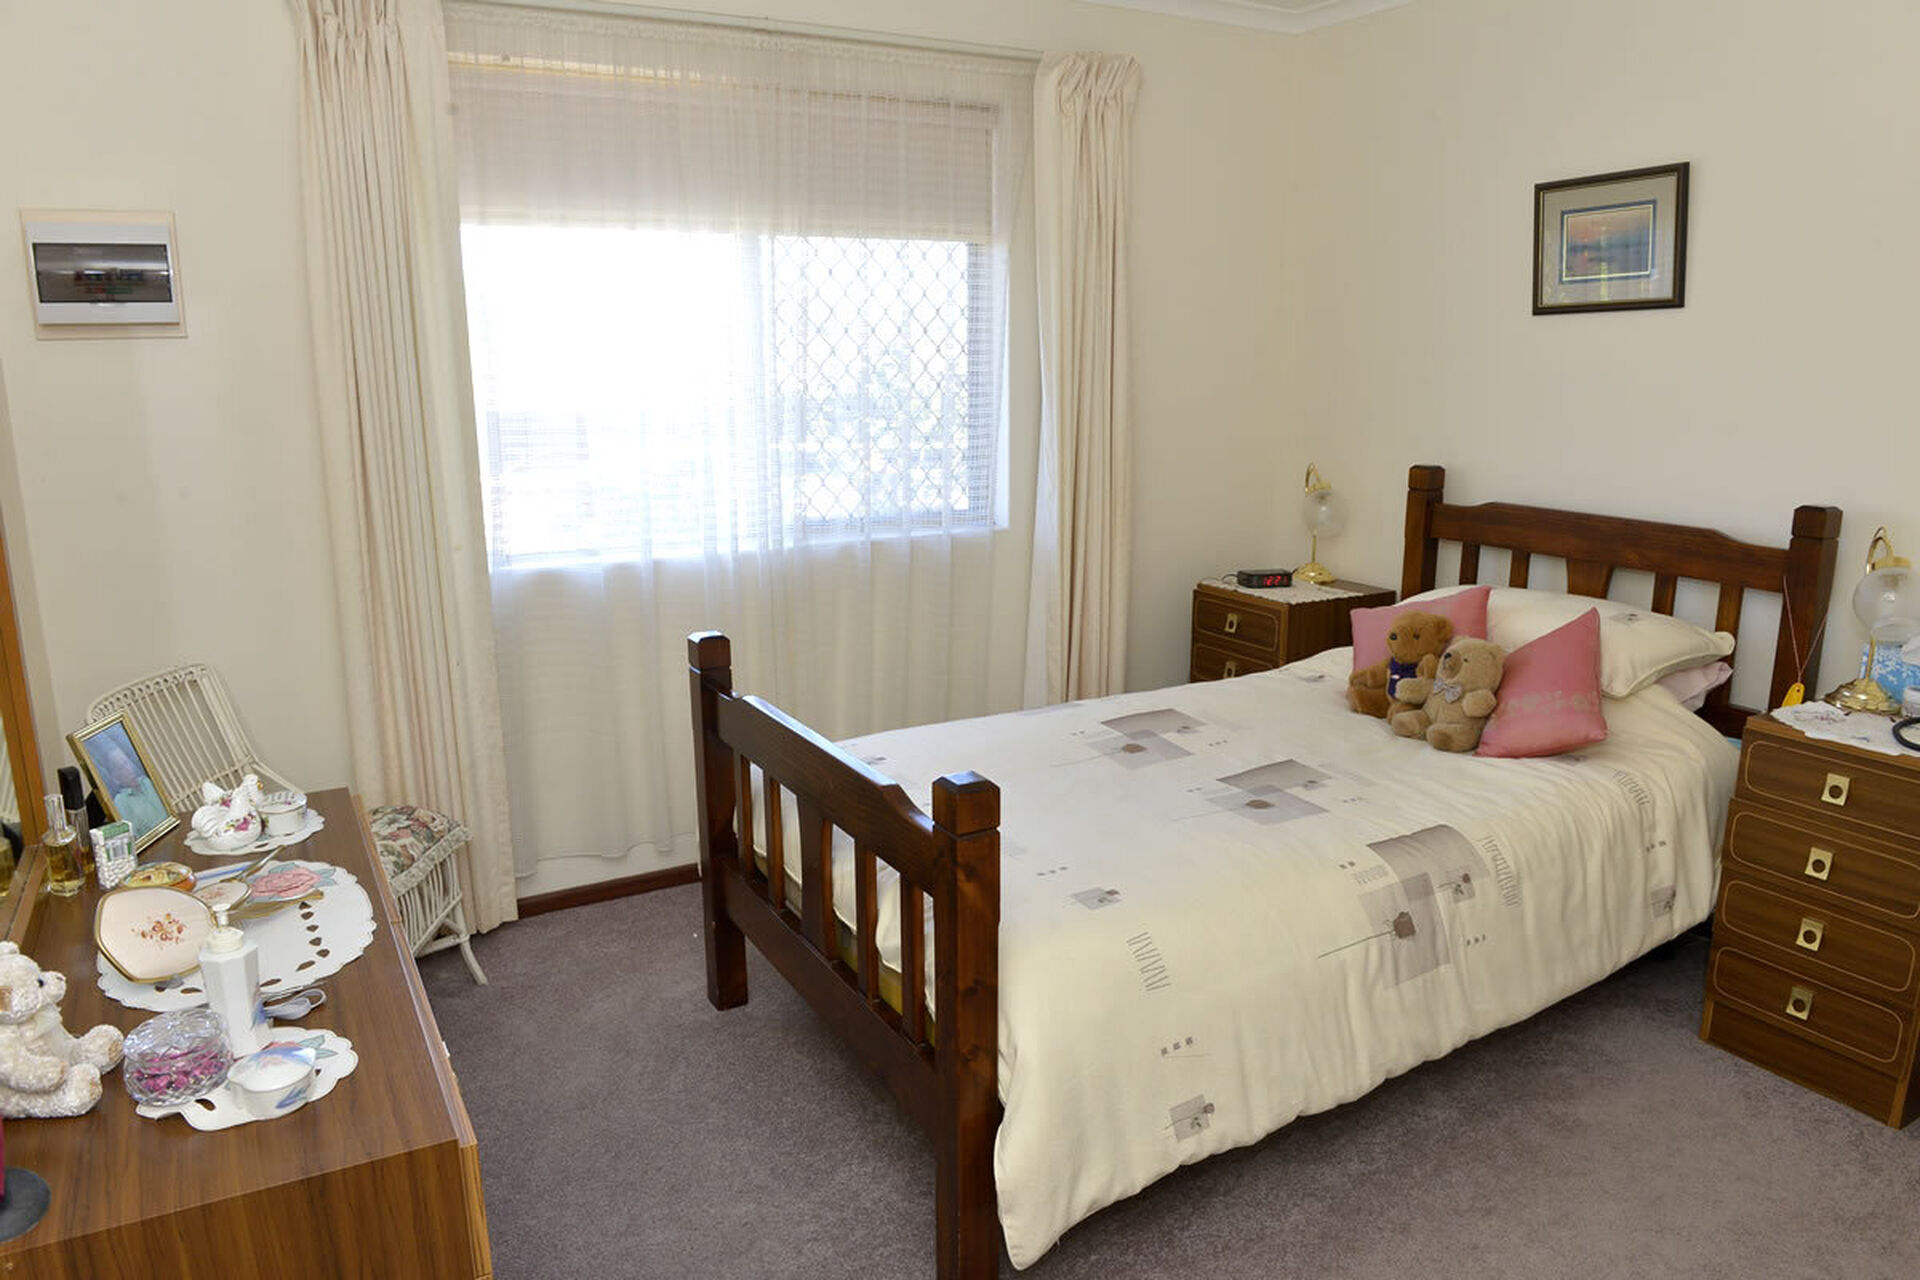 spacious interior of one of the retirement villas available at the over 55s baptistcare bethel retirement village in albany wa